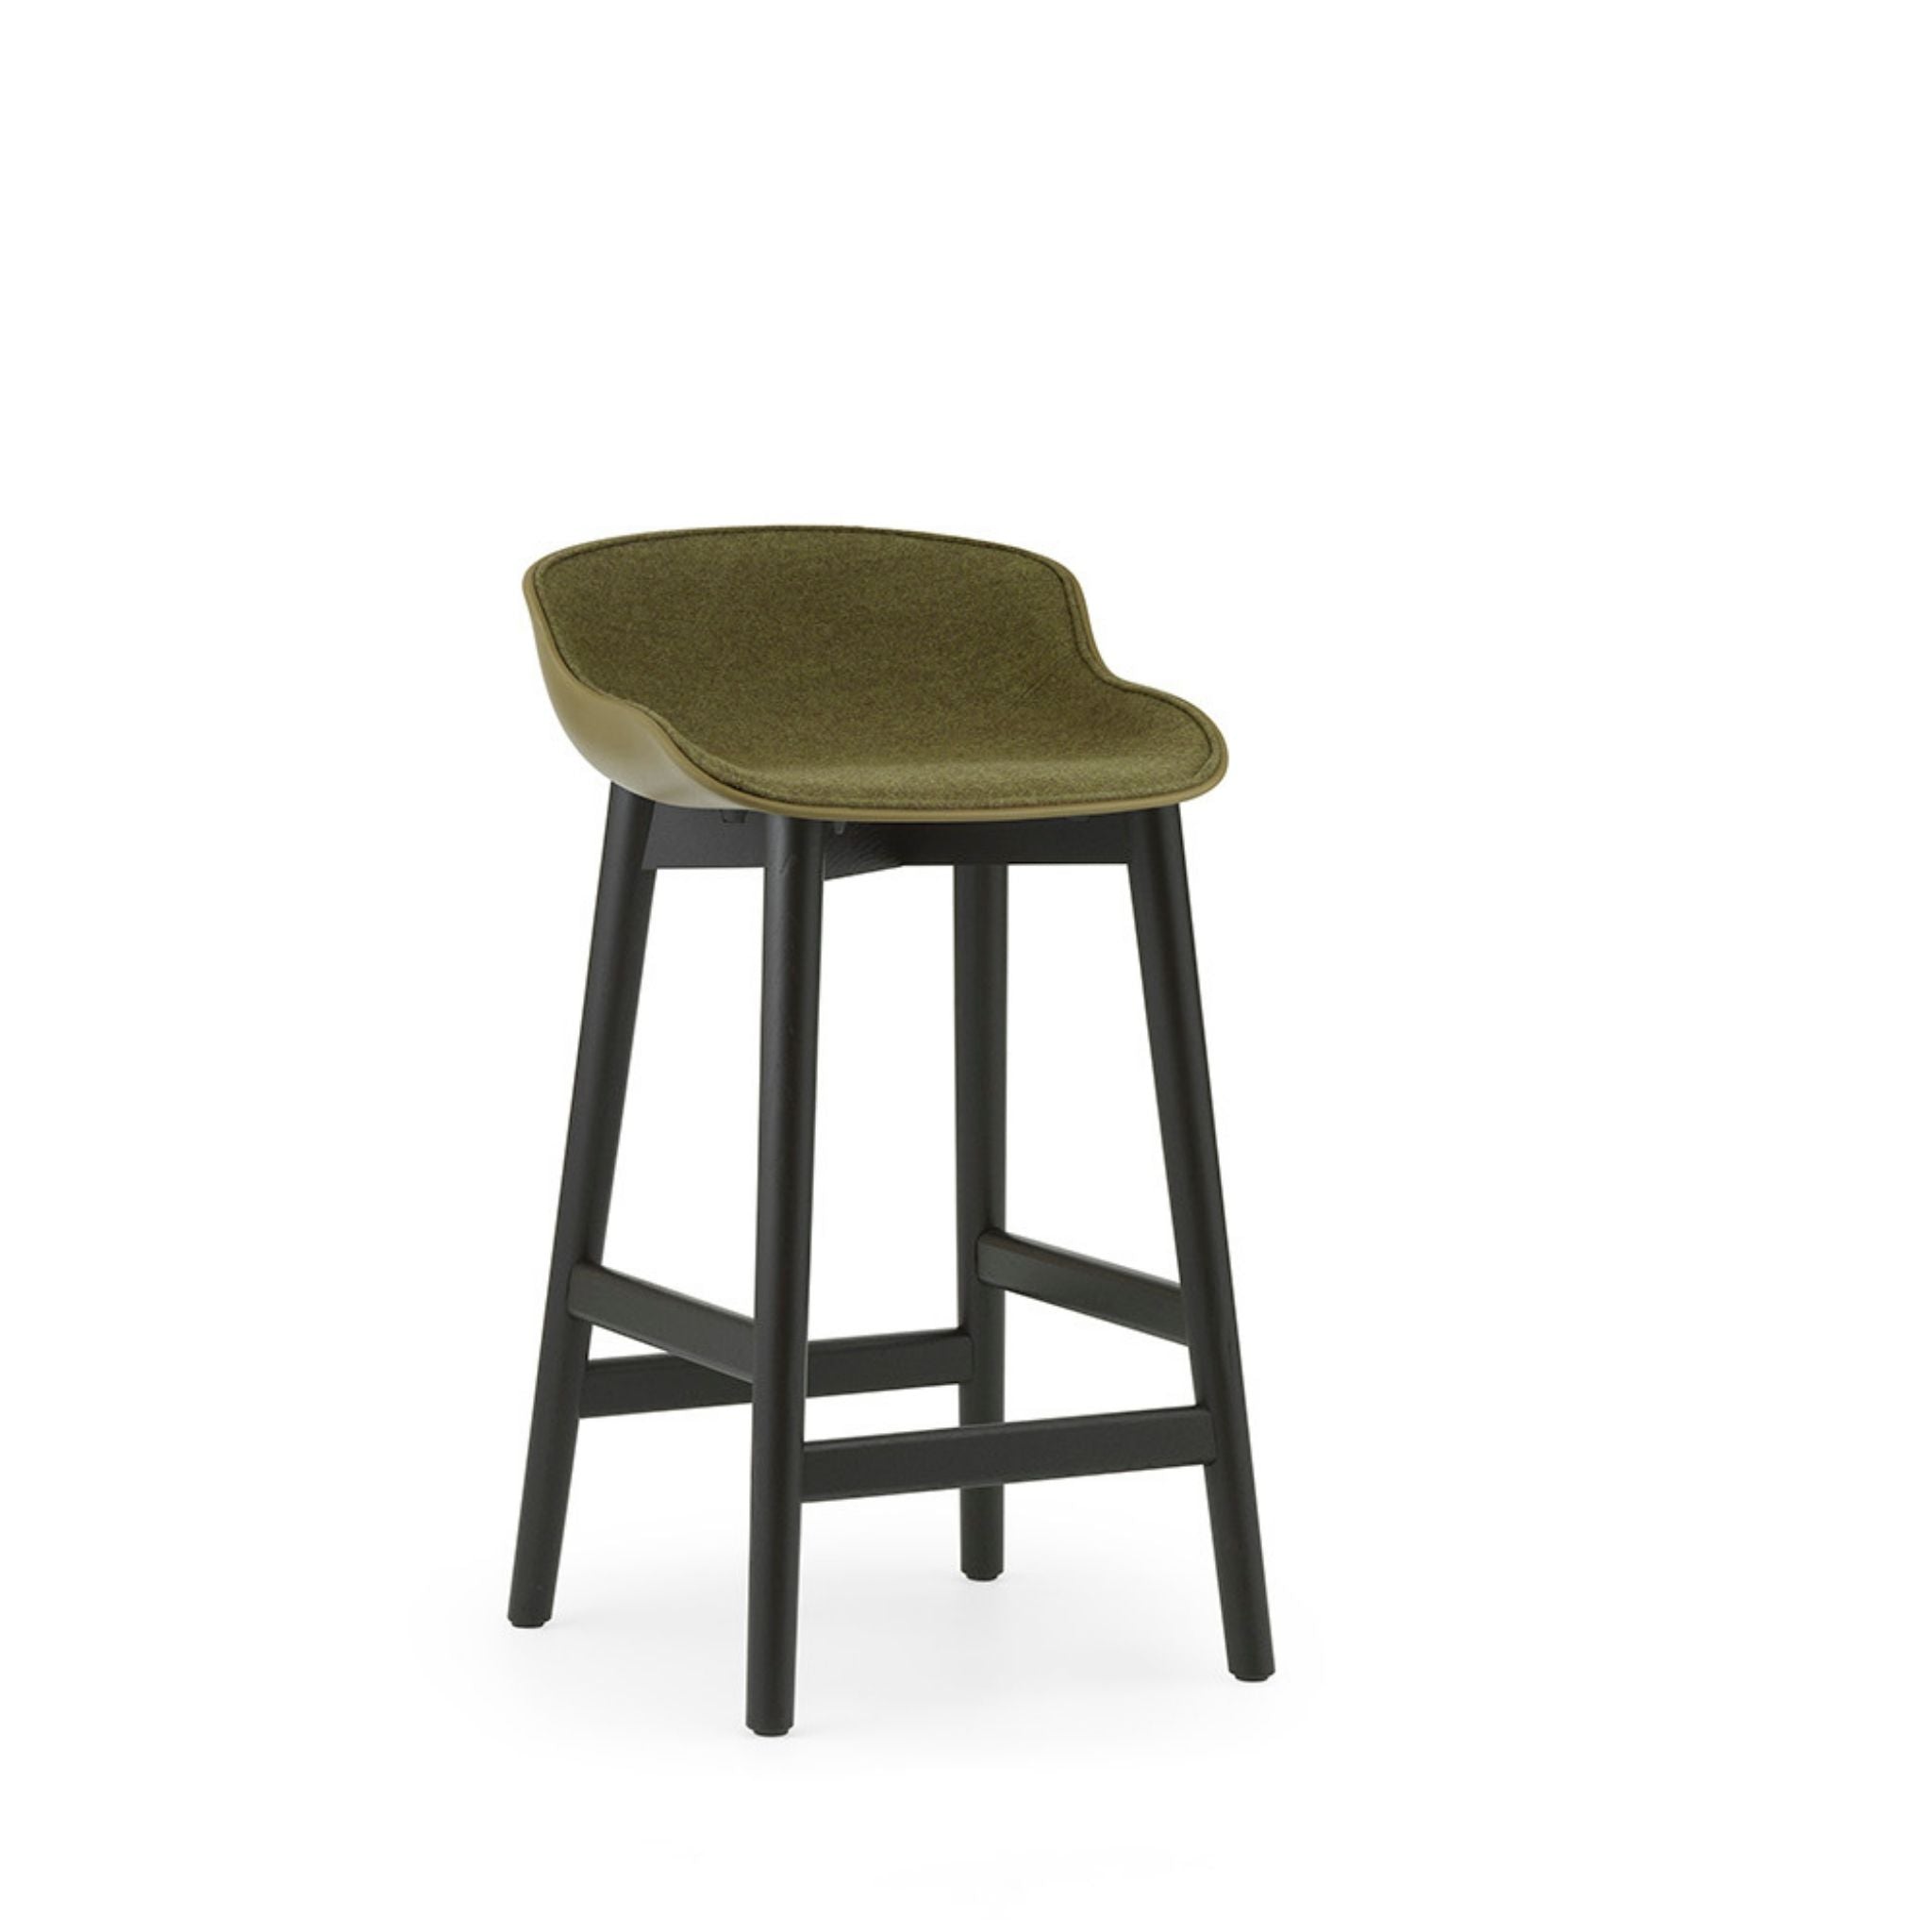 Hyg Stool Front Upholstery Wood Leg - Valley Variety